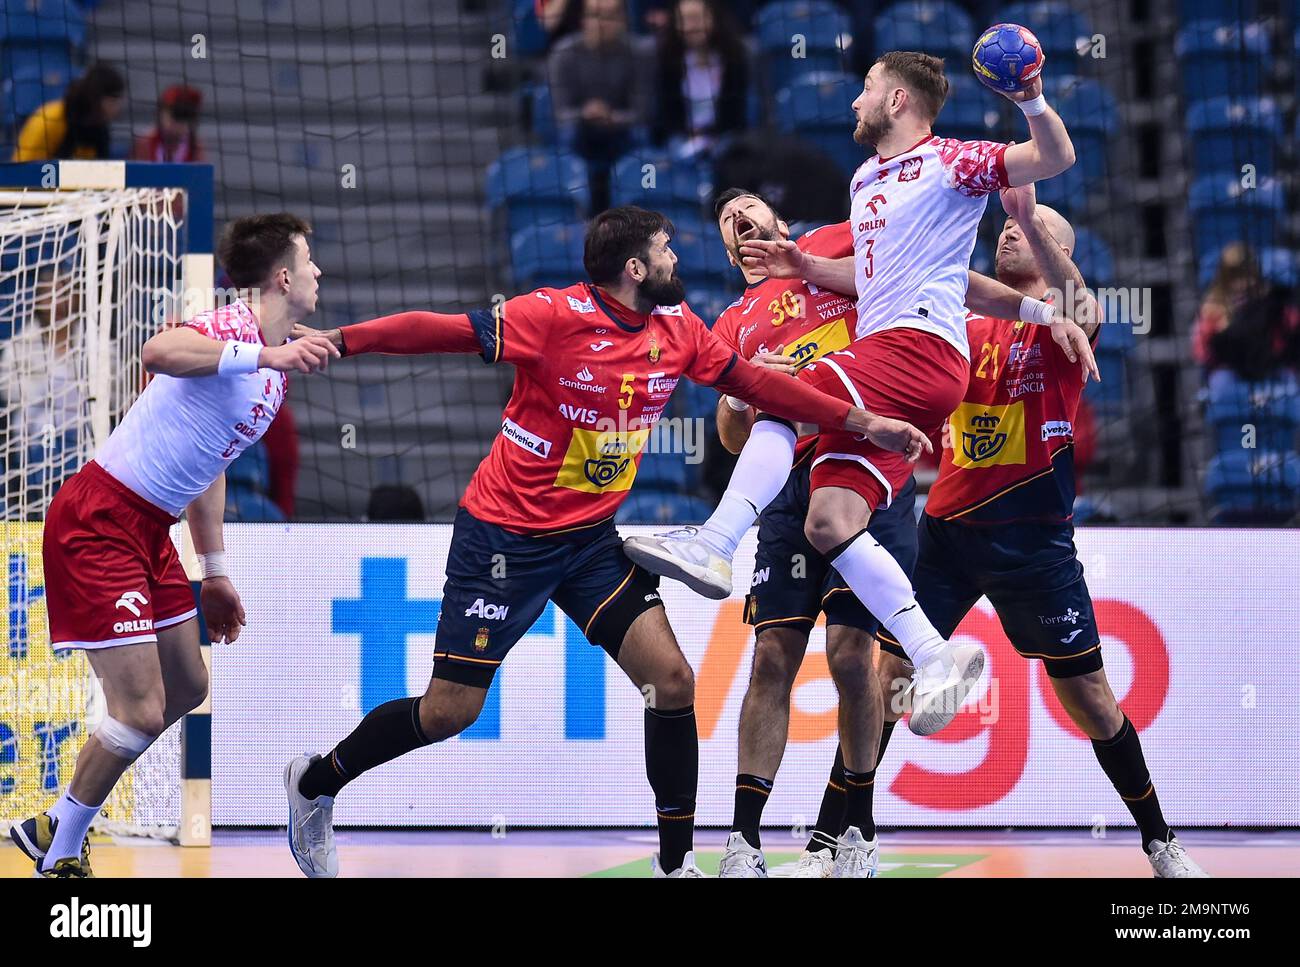 Cracow, Poland. 18th Jan, 2023. Gedeon Guardiola Villaplana Michal Daszek during IHF Men's World Championship match between Poland and Spain on January 18, 2023 in Cracow, Poland. (Photo by PressFocus/Sipa USA) Credit: Sipa USA/Alamy Live News Stock Photo